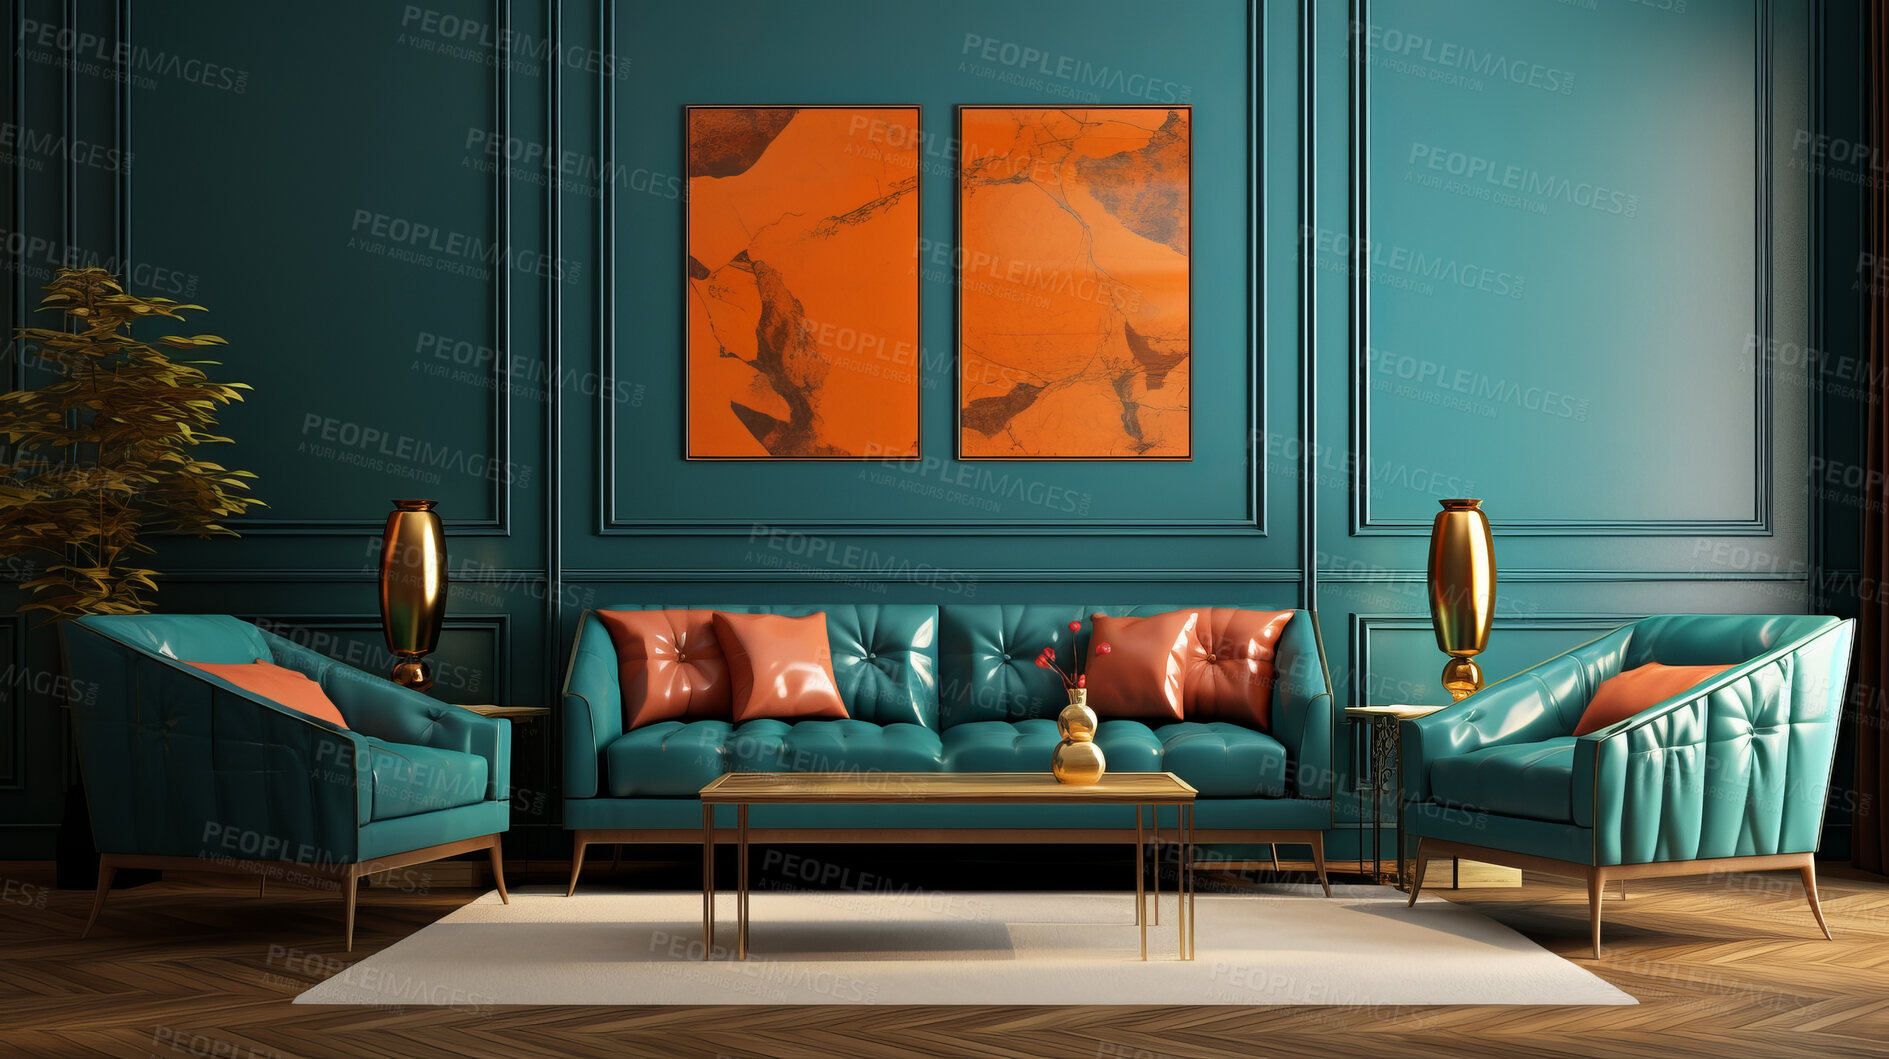 Buy stock photo Teal living room sofa design with decor. Modern interior layout idea concept